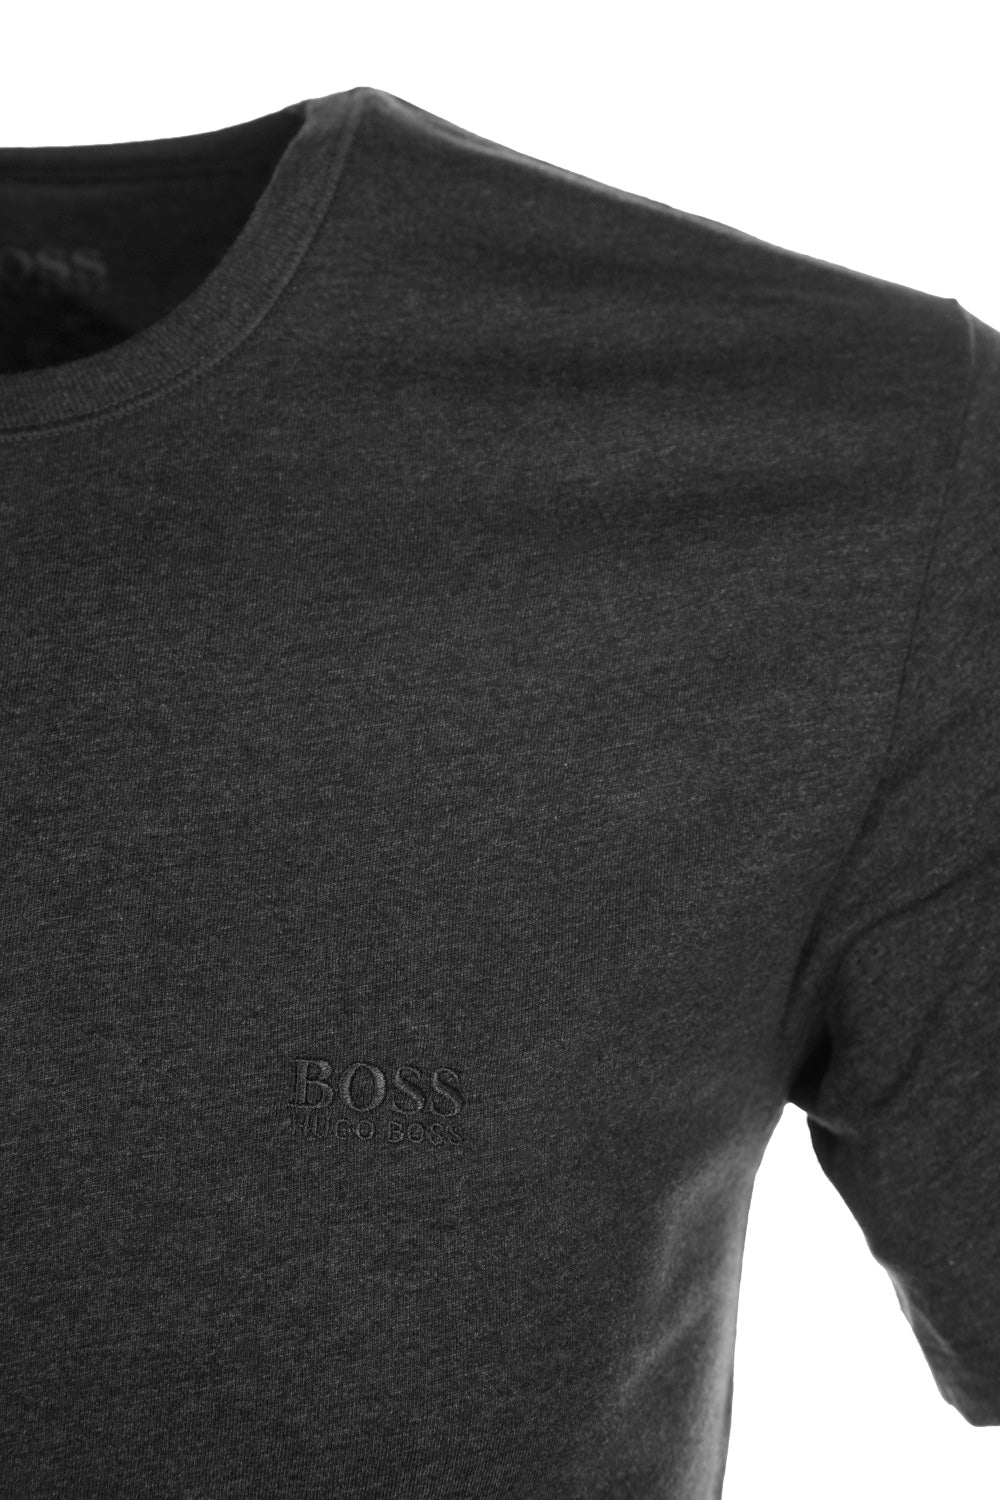 BOSS 3 Pack RN T Shirt in Charcoal Shoulder